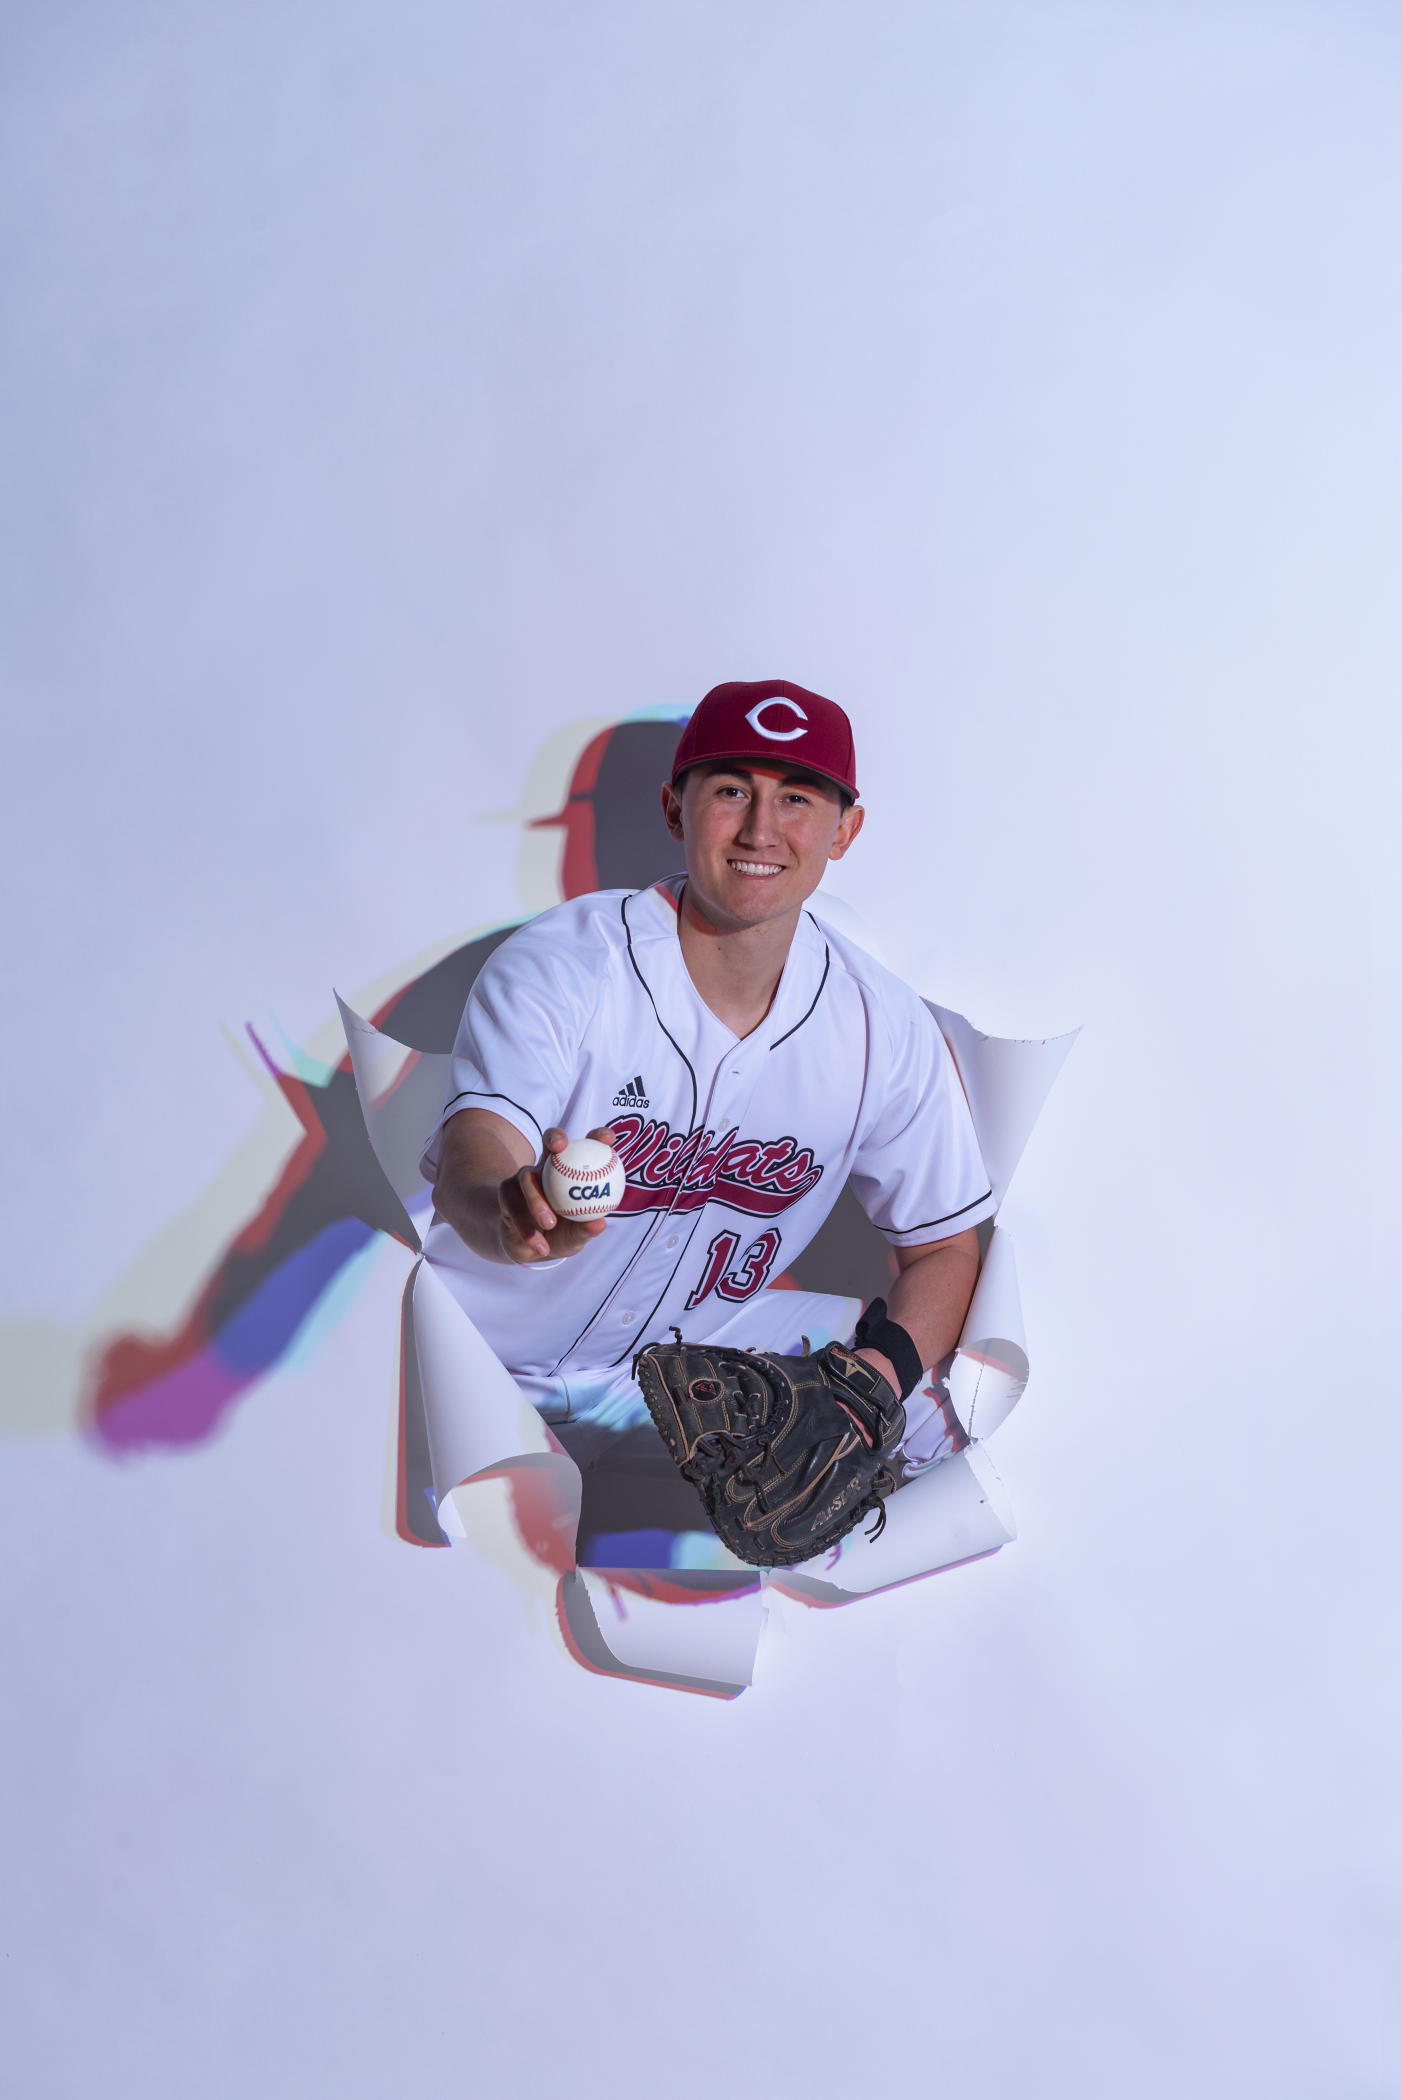 Tyler Stofiel breaks through a white photo backdrop in his uniform and a baseball in hand.